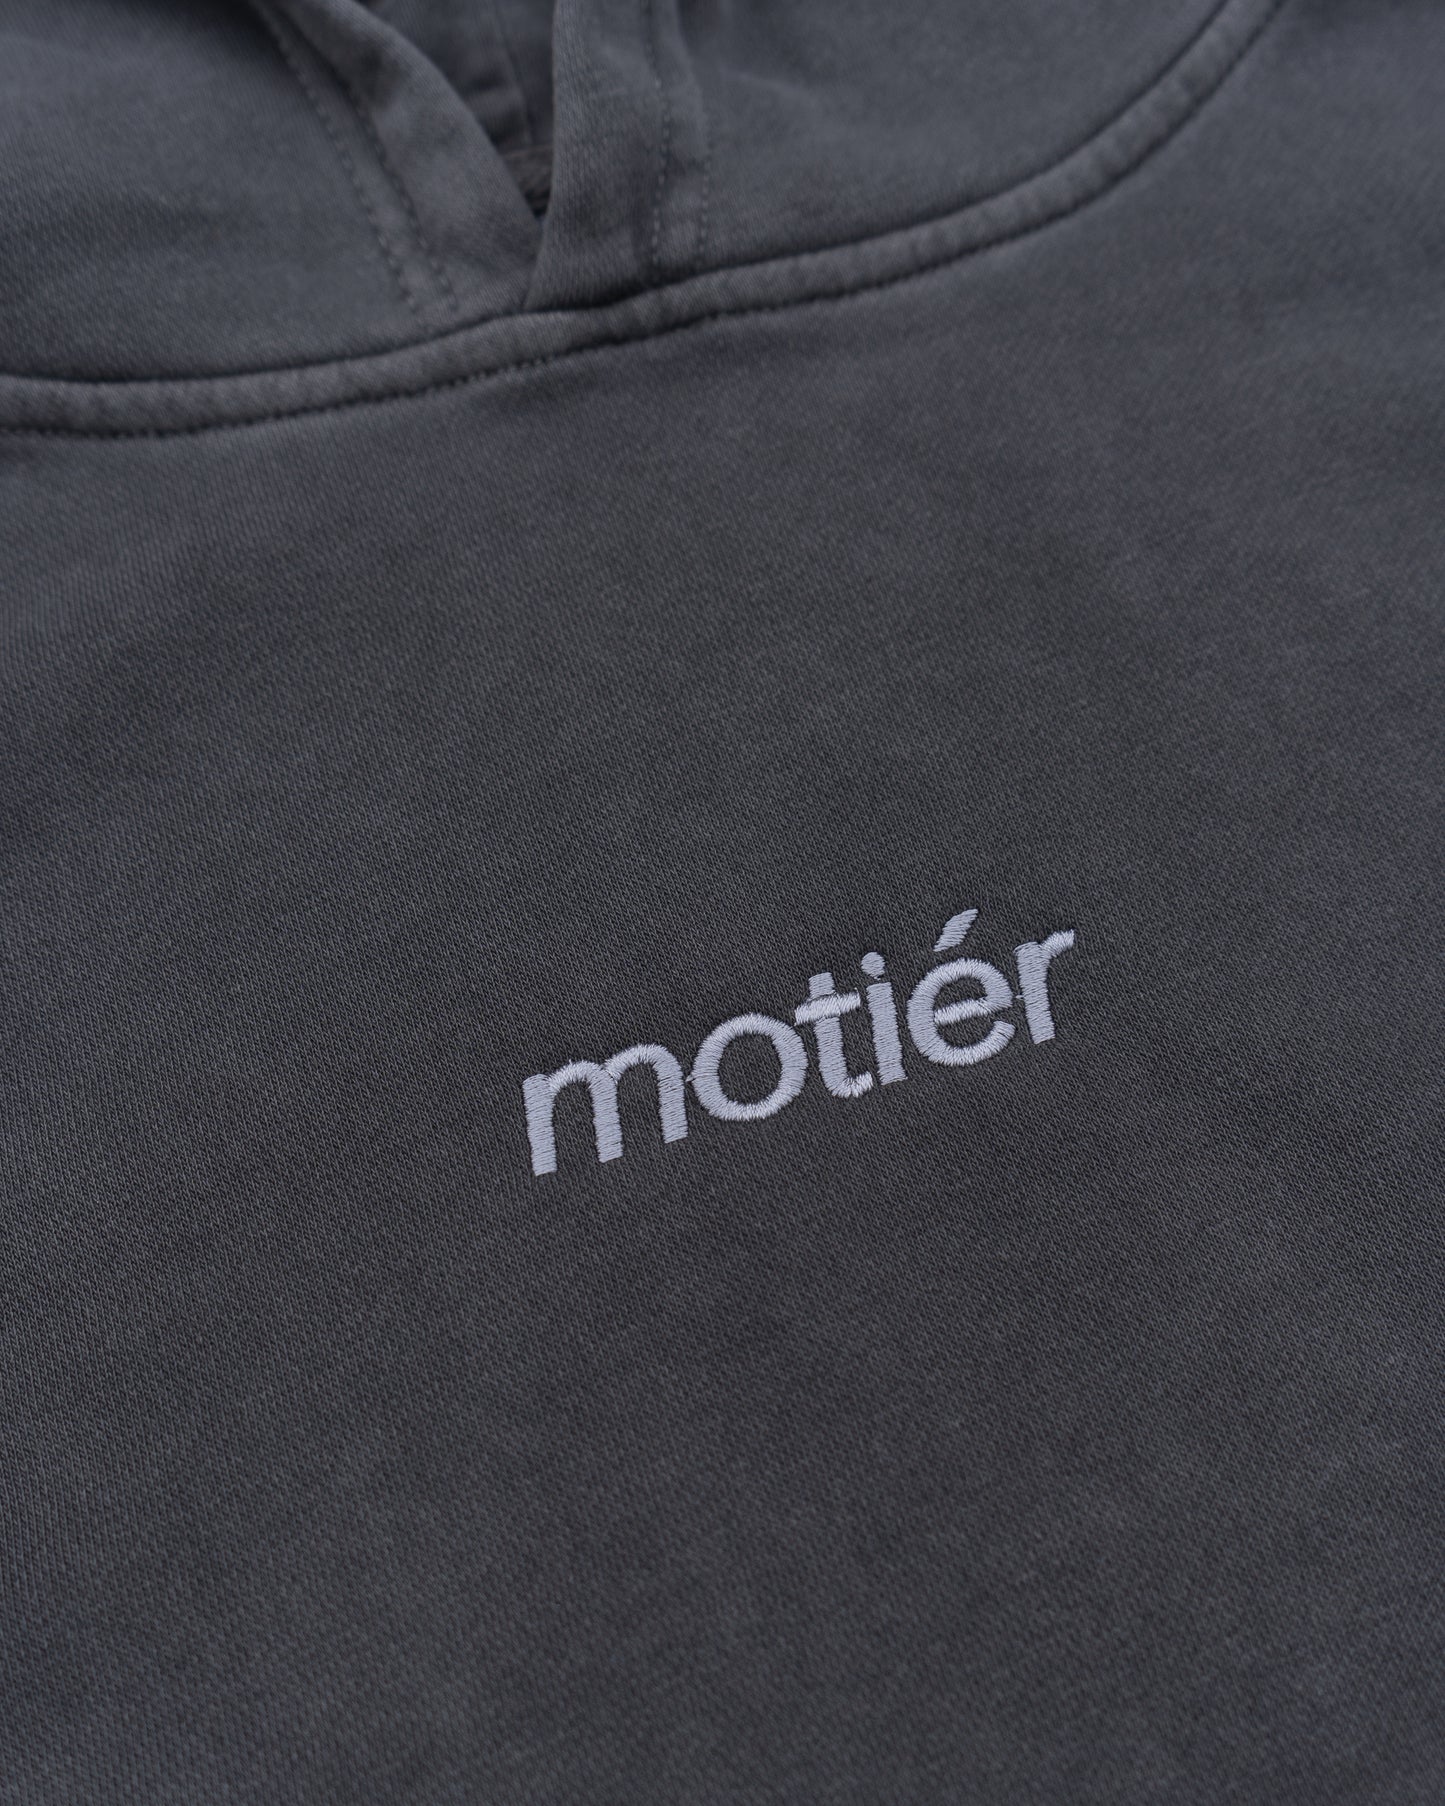 The Motier Youth Classic Embroidery Hoodie (Charcoal)